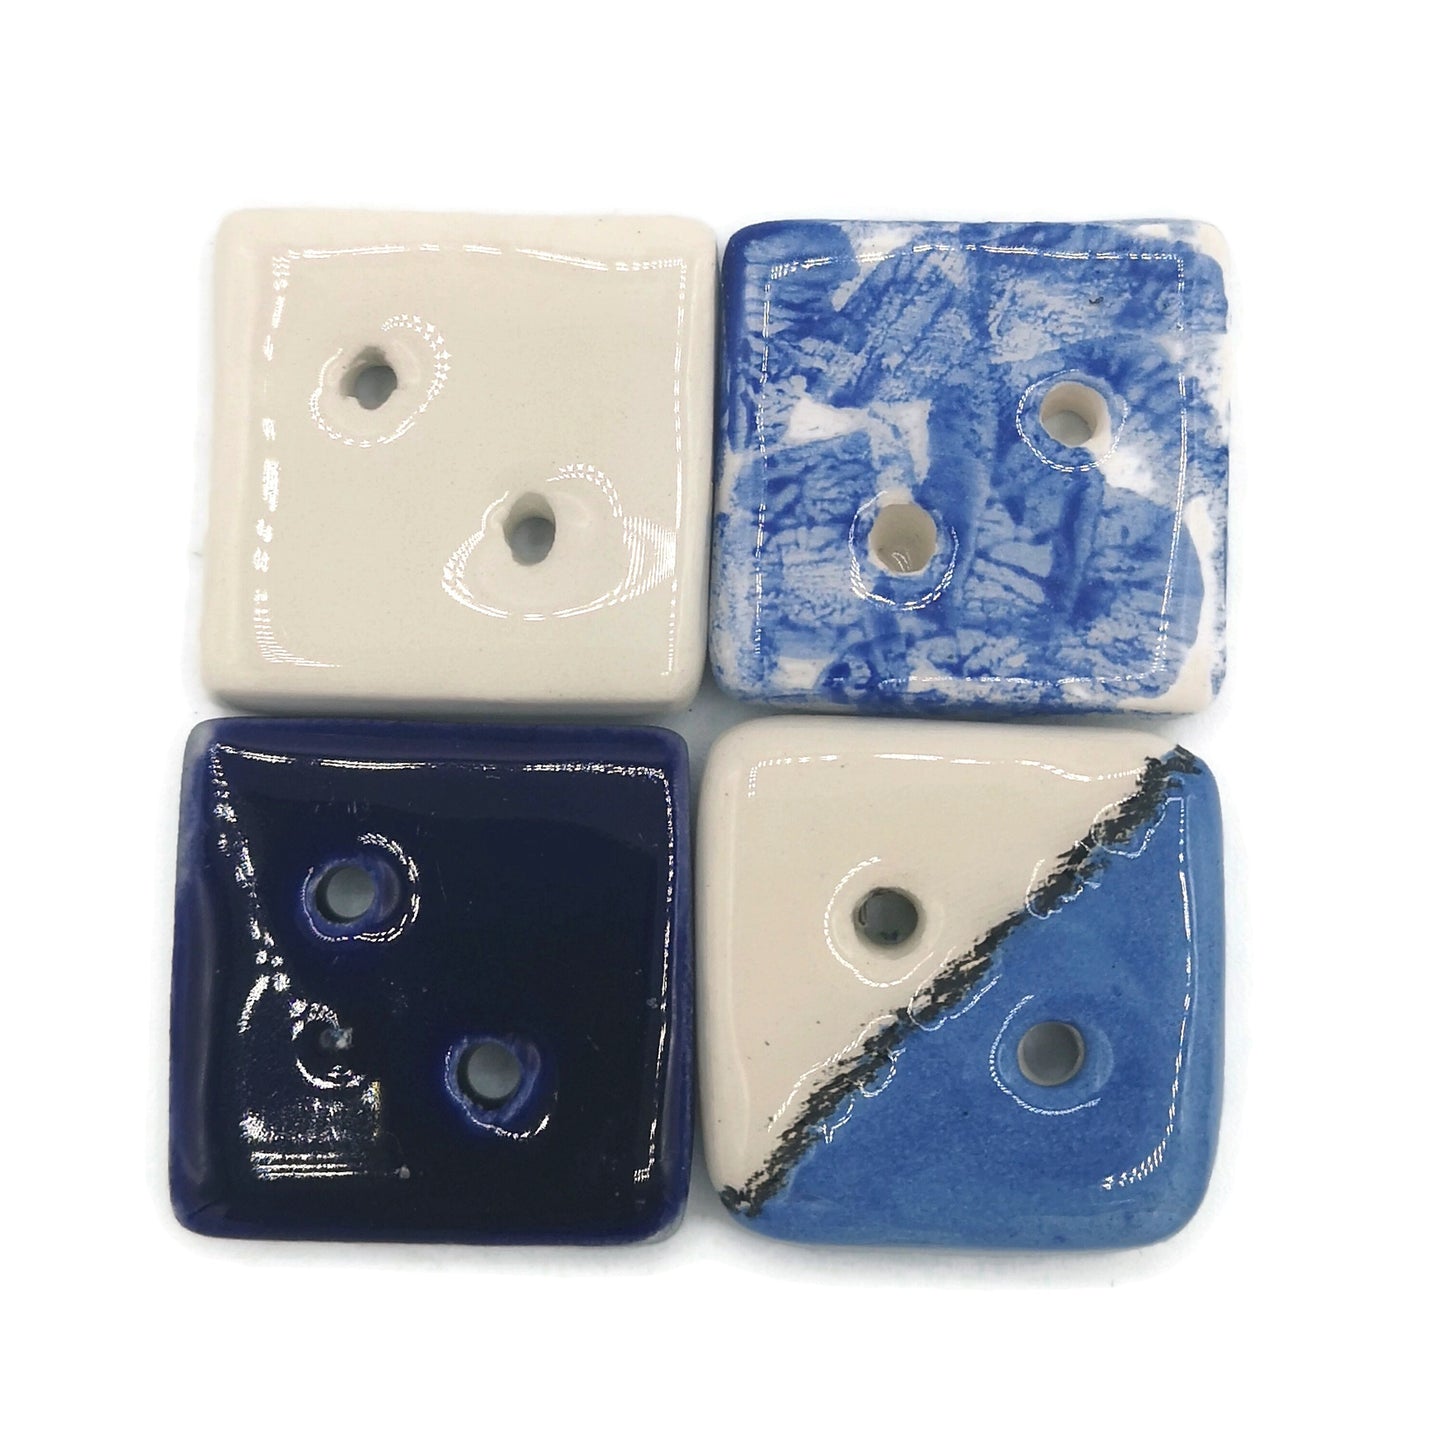 4Pc 30mm Handmade Ceramic Square Blue Sewing Buttons for Crafts, Elegant Extra Large Coat Buttons, Best Sellers Sewing Supplies And Notions - Ceramica Ana Rafael